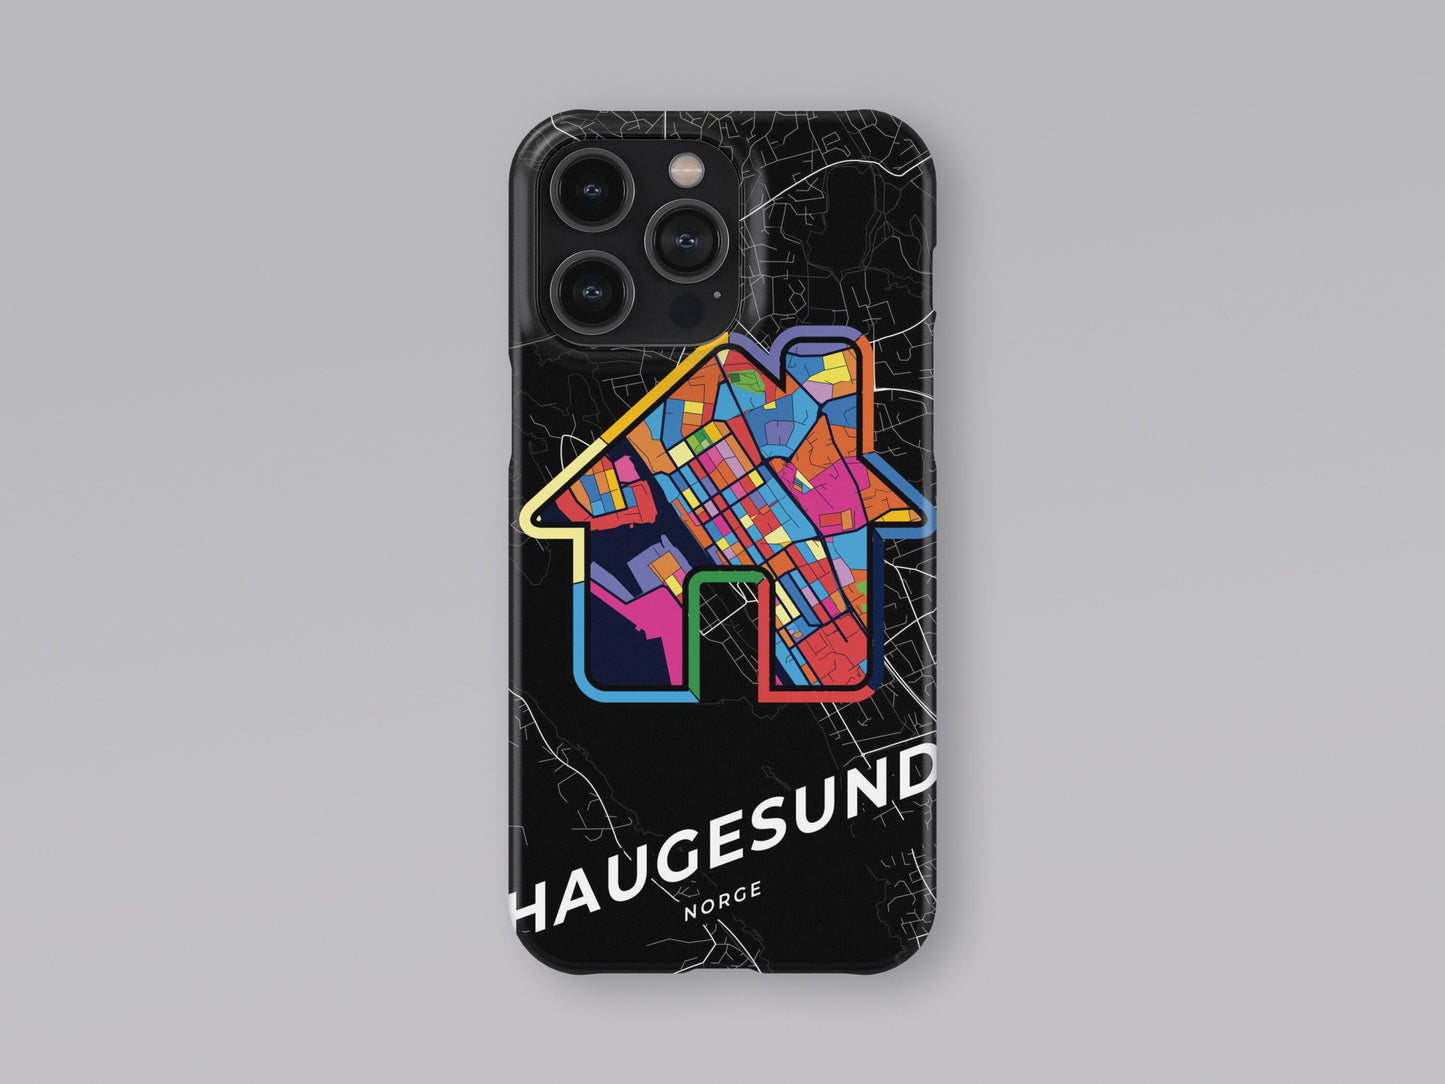 Haugesund Norway slim phone case with colorful icon. Birthday, wedding or housewarming gift. Couple match cases. 3